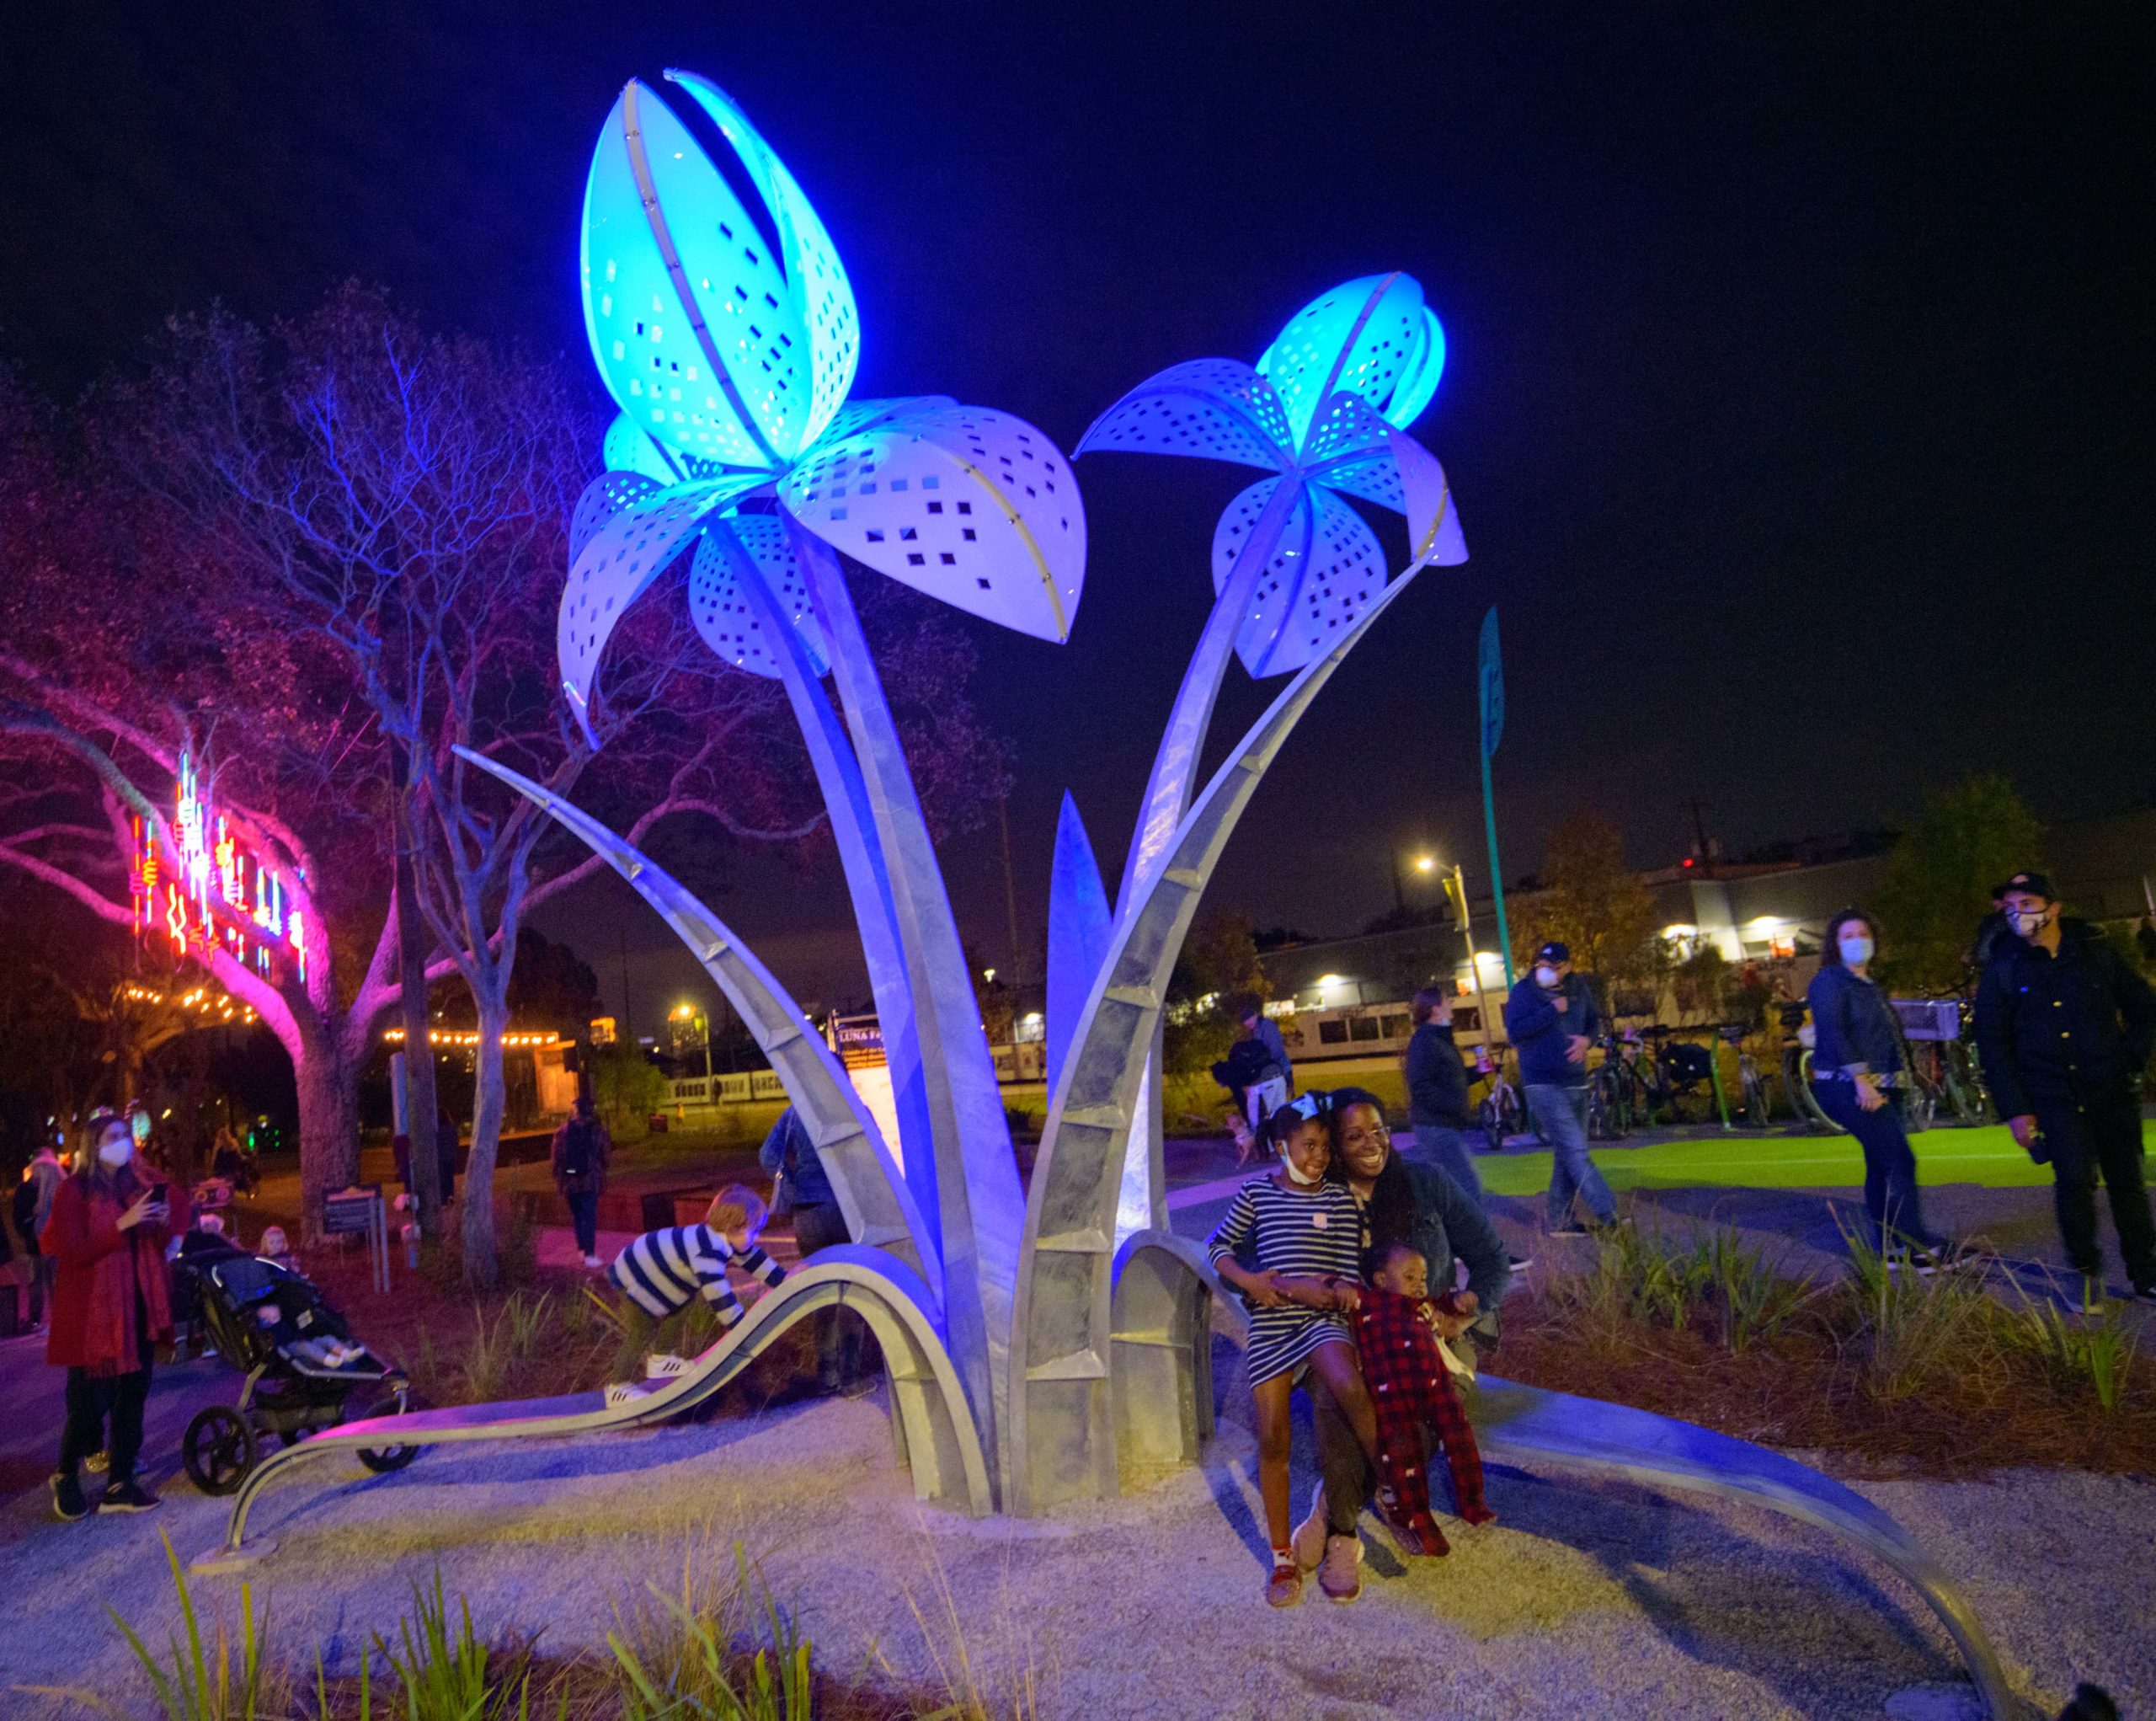 Small groups socially distance and enjoy the Iris of Memory designed by William Nemitoff, Friday, December 11, 2020. Luna Fete is partnering with Friends of the Lafitte Greenway for Supernova on the Greenway, a luminary art exhibit bringing light and life to the Greenway in December 2020 to celebrate the Greenways 5th birthday. The displays are visible 5-9pm nightly till December 20th with special projected displays around the city on the weekends. Luna Fete scaled down from its large displays along Lafayette Street in the CBD because of the pandemic this year. Nemitoff worked with Luna Fete in past years and wrote on the dedication plaque May this space be filled with love, laughter, creativity and blossoms of new memories. The steel sculpture is inspired by the Louisiana Iris planted nearby in the bioswales or channels to move stormwater on the greenway. Other displays include Reconnecting to Connect by Monique Lorden, which shows different colored figures slowing raising a fist for change, and the Alveare Luminoso (Glowing Hive) by Luba Zygarewicz that is a series of honeycombed shape panels that make interesting colors in the darkness. Ketleflower by Josh Pitts resembles a sunflower and is a light + sound immersive art installation created with the intention of providing a breath of fresh air.  VectorFlow by Marcella Del Signore and Cordula Roser Gray is located in Duncan Plaza and consists of sculptural trees that utilize a sensor system to record movement of nearby pedestrians. And The FENCE lines the Greenway with photos taken from around the world including some by local artists.  Photos by Matthew Hinton 